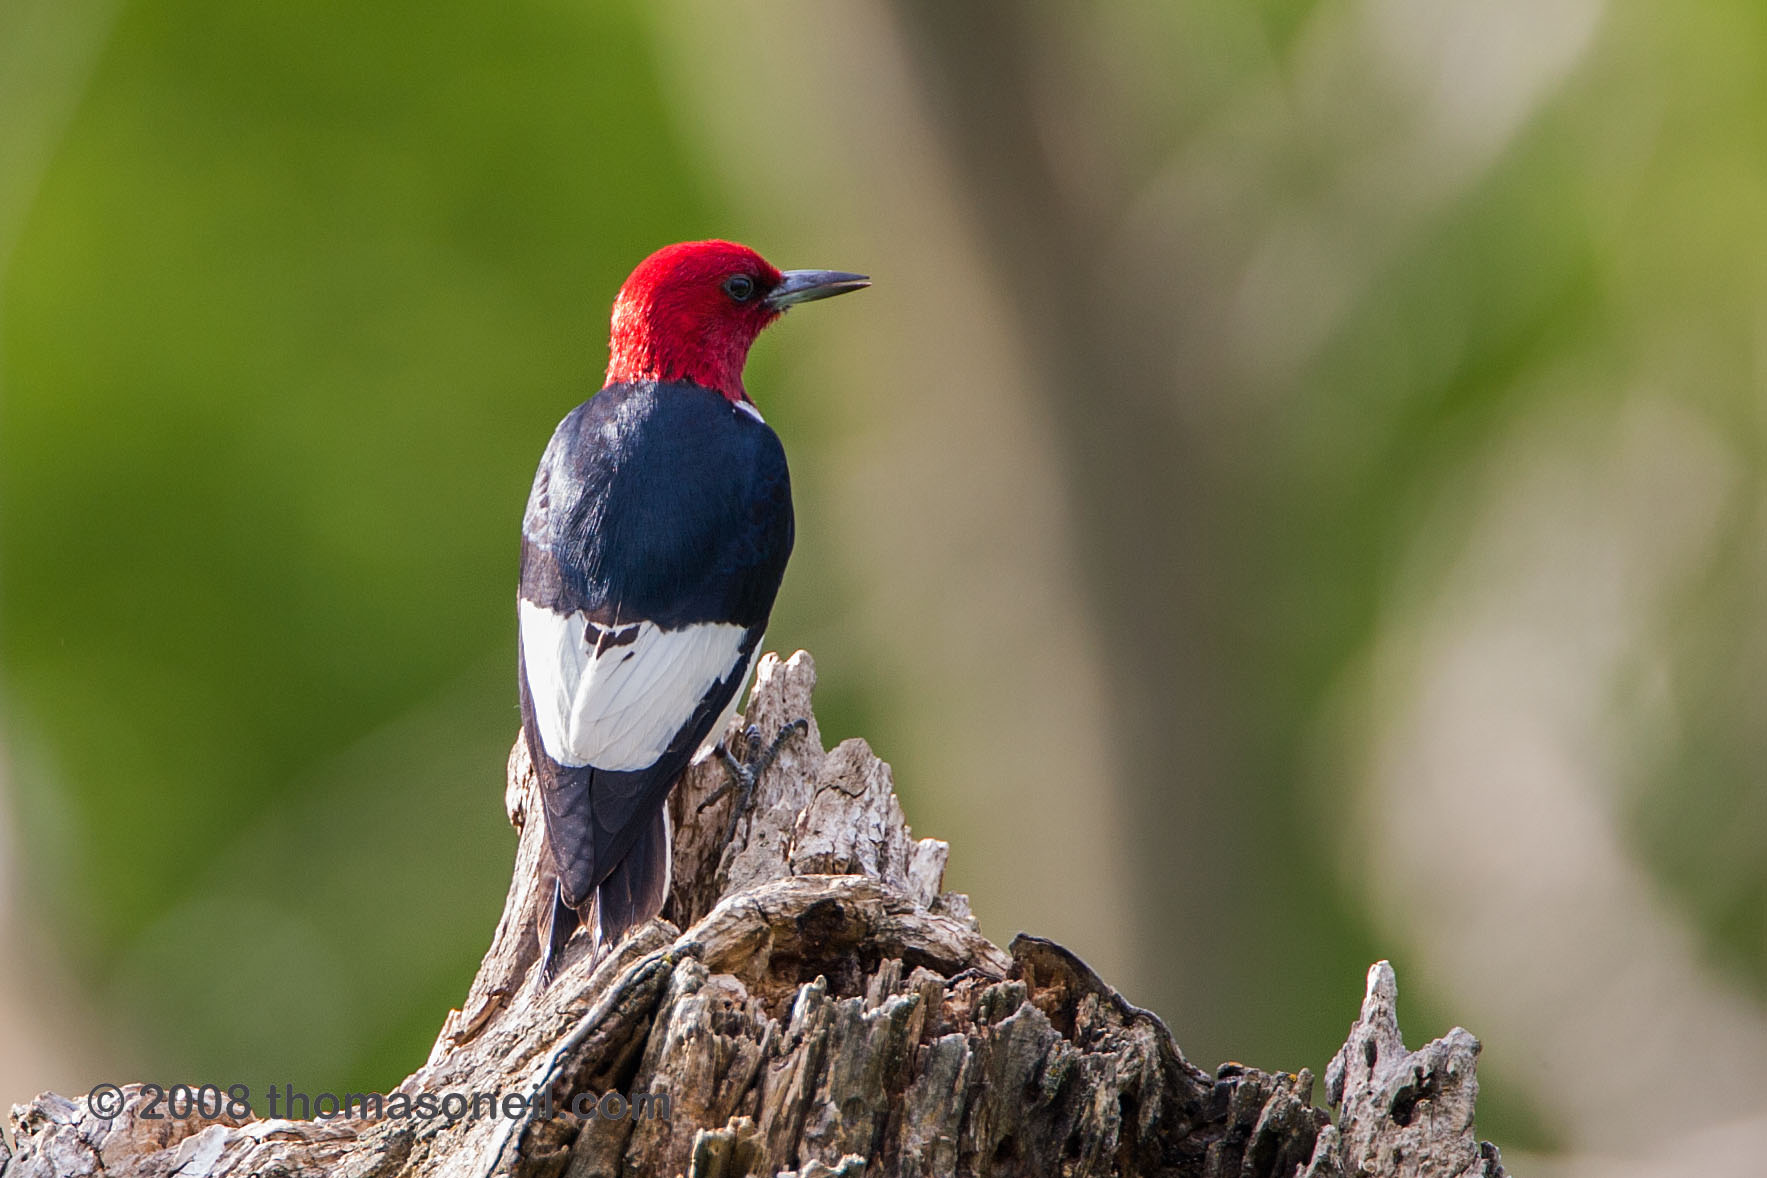 Red-headed woodpecker, Newton Hills State Park, SD, 2008.  Click for next photo.